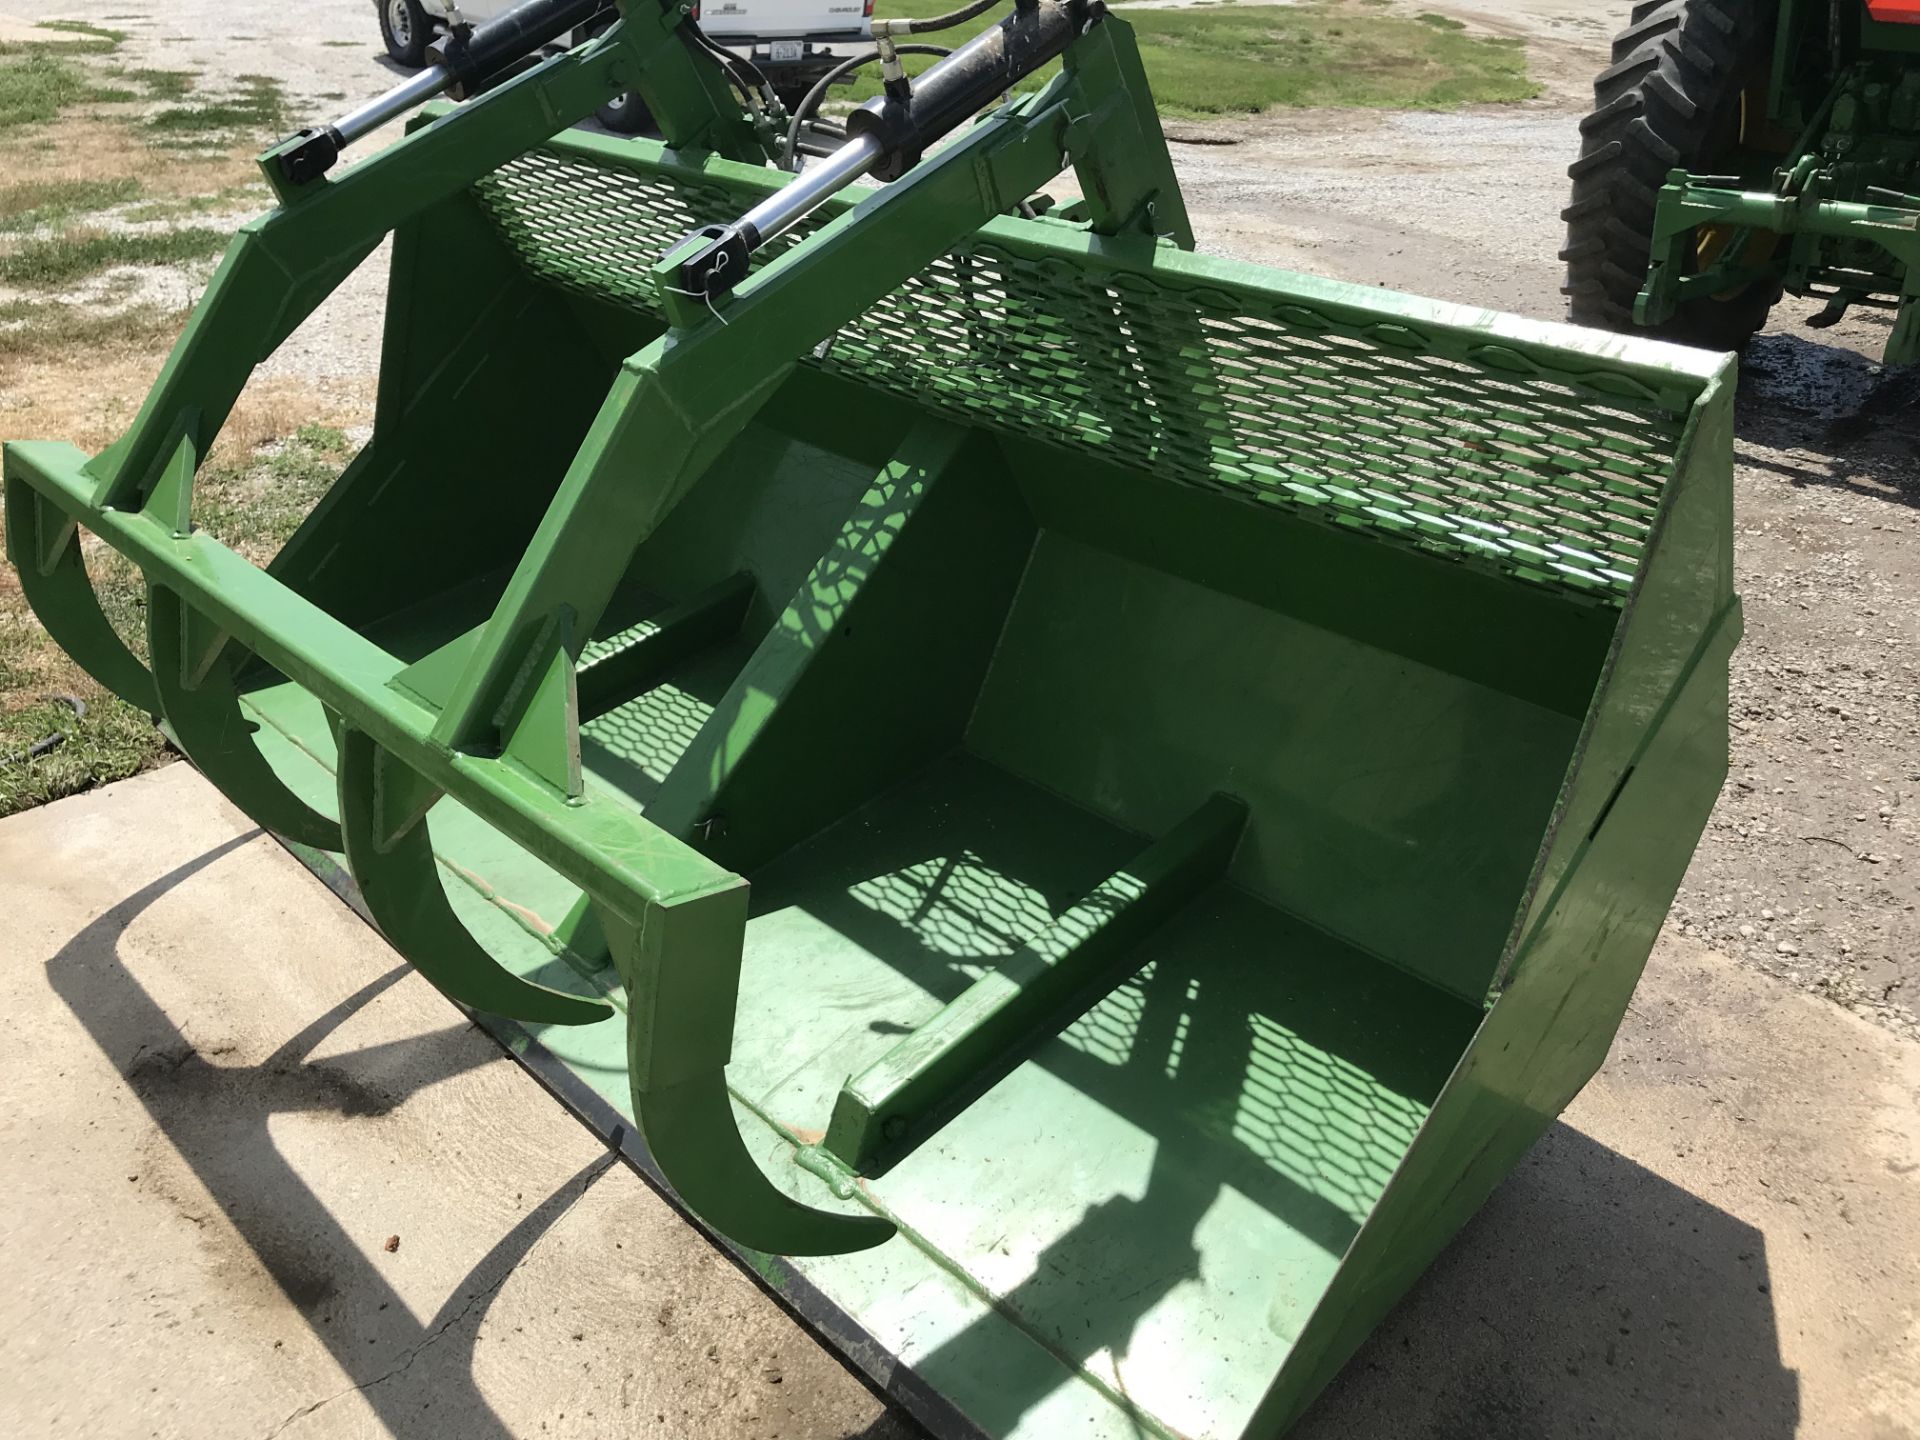 2015 Gnuse Mdl.L108 Scoop w/4 Tine Grapple (1 owner, like new) - Image 4 of 6